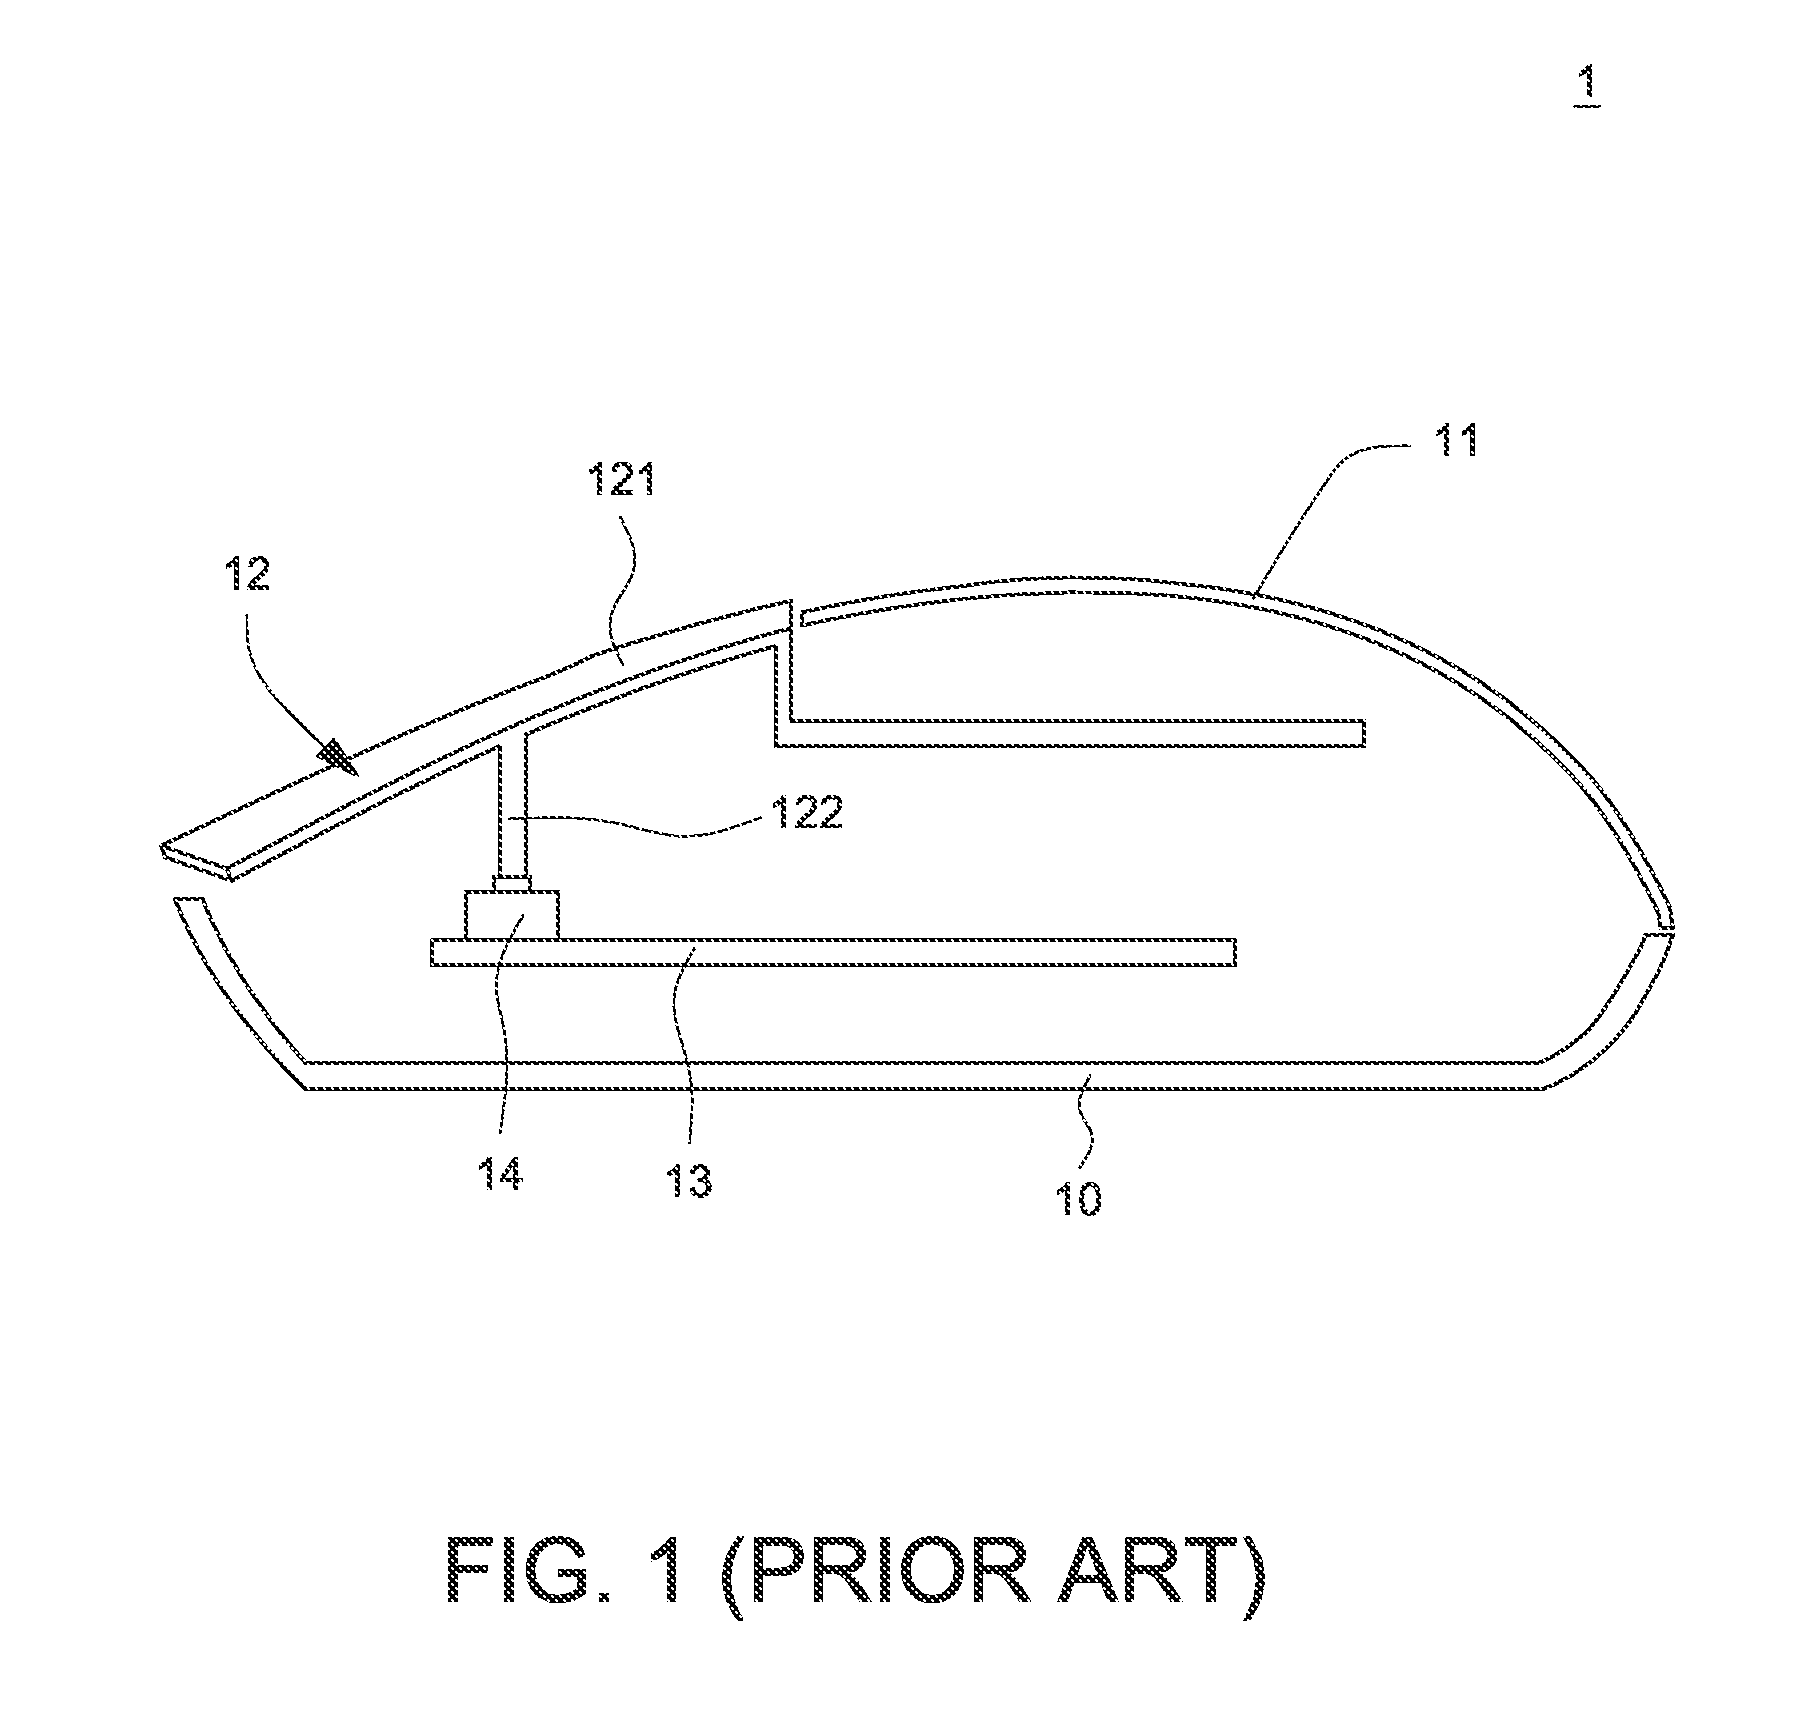 Mouse device operable with variable button-pressing force